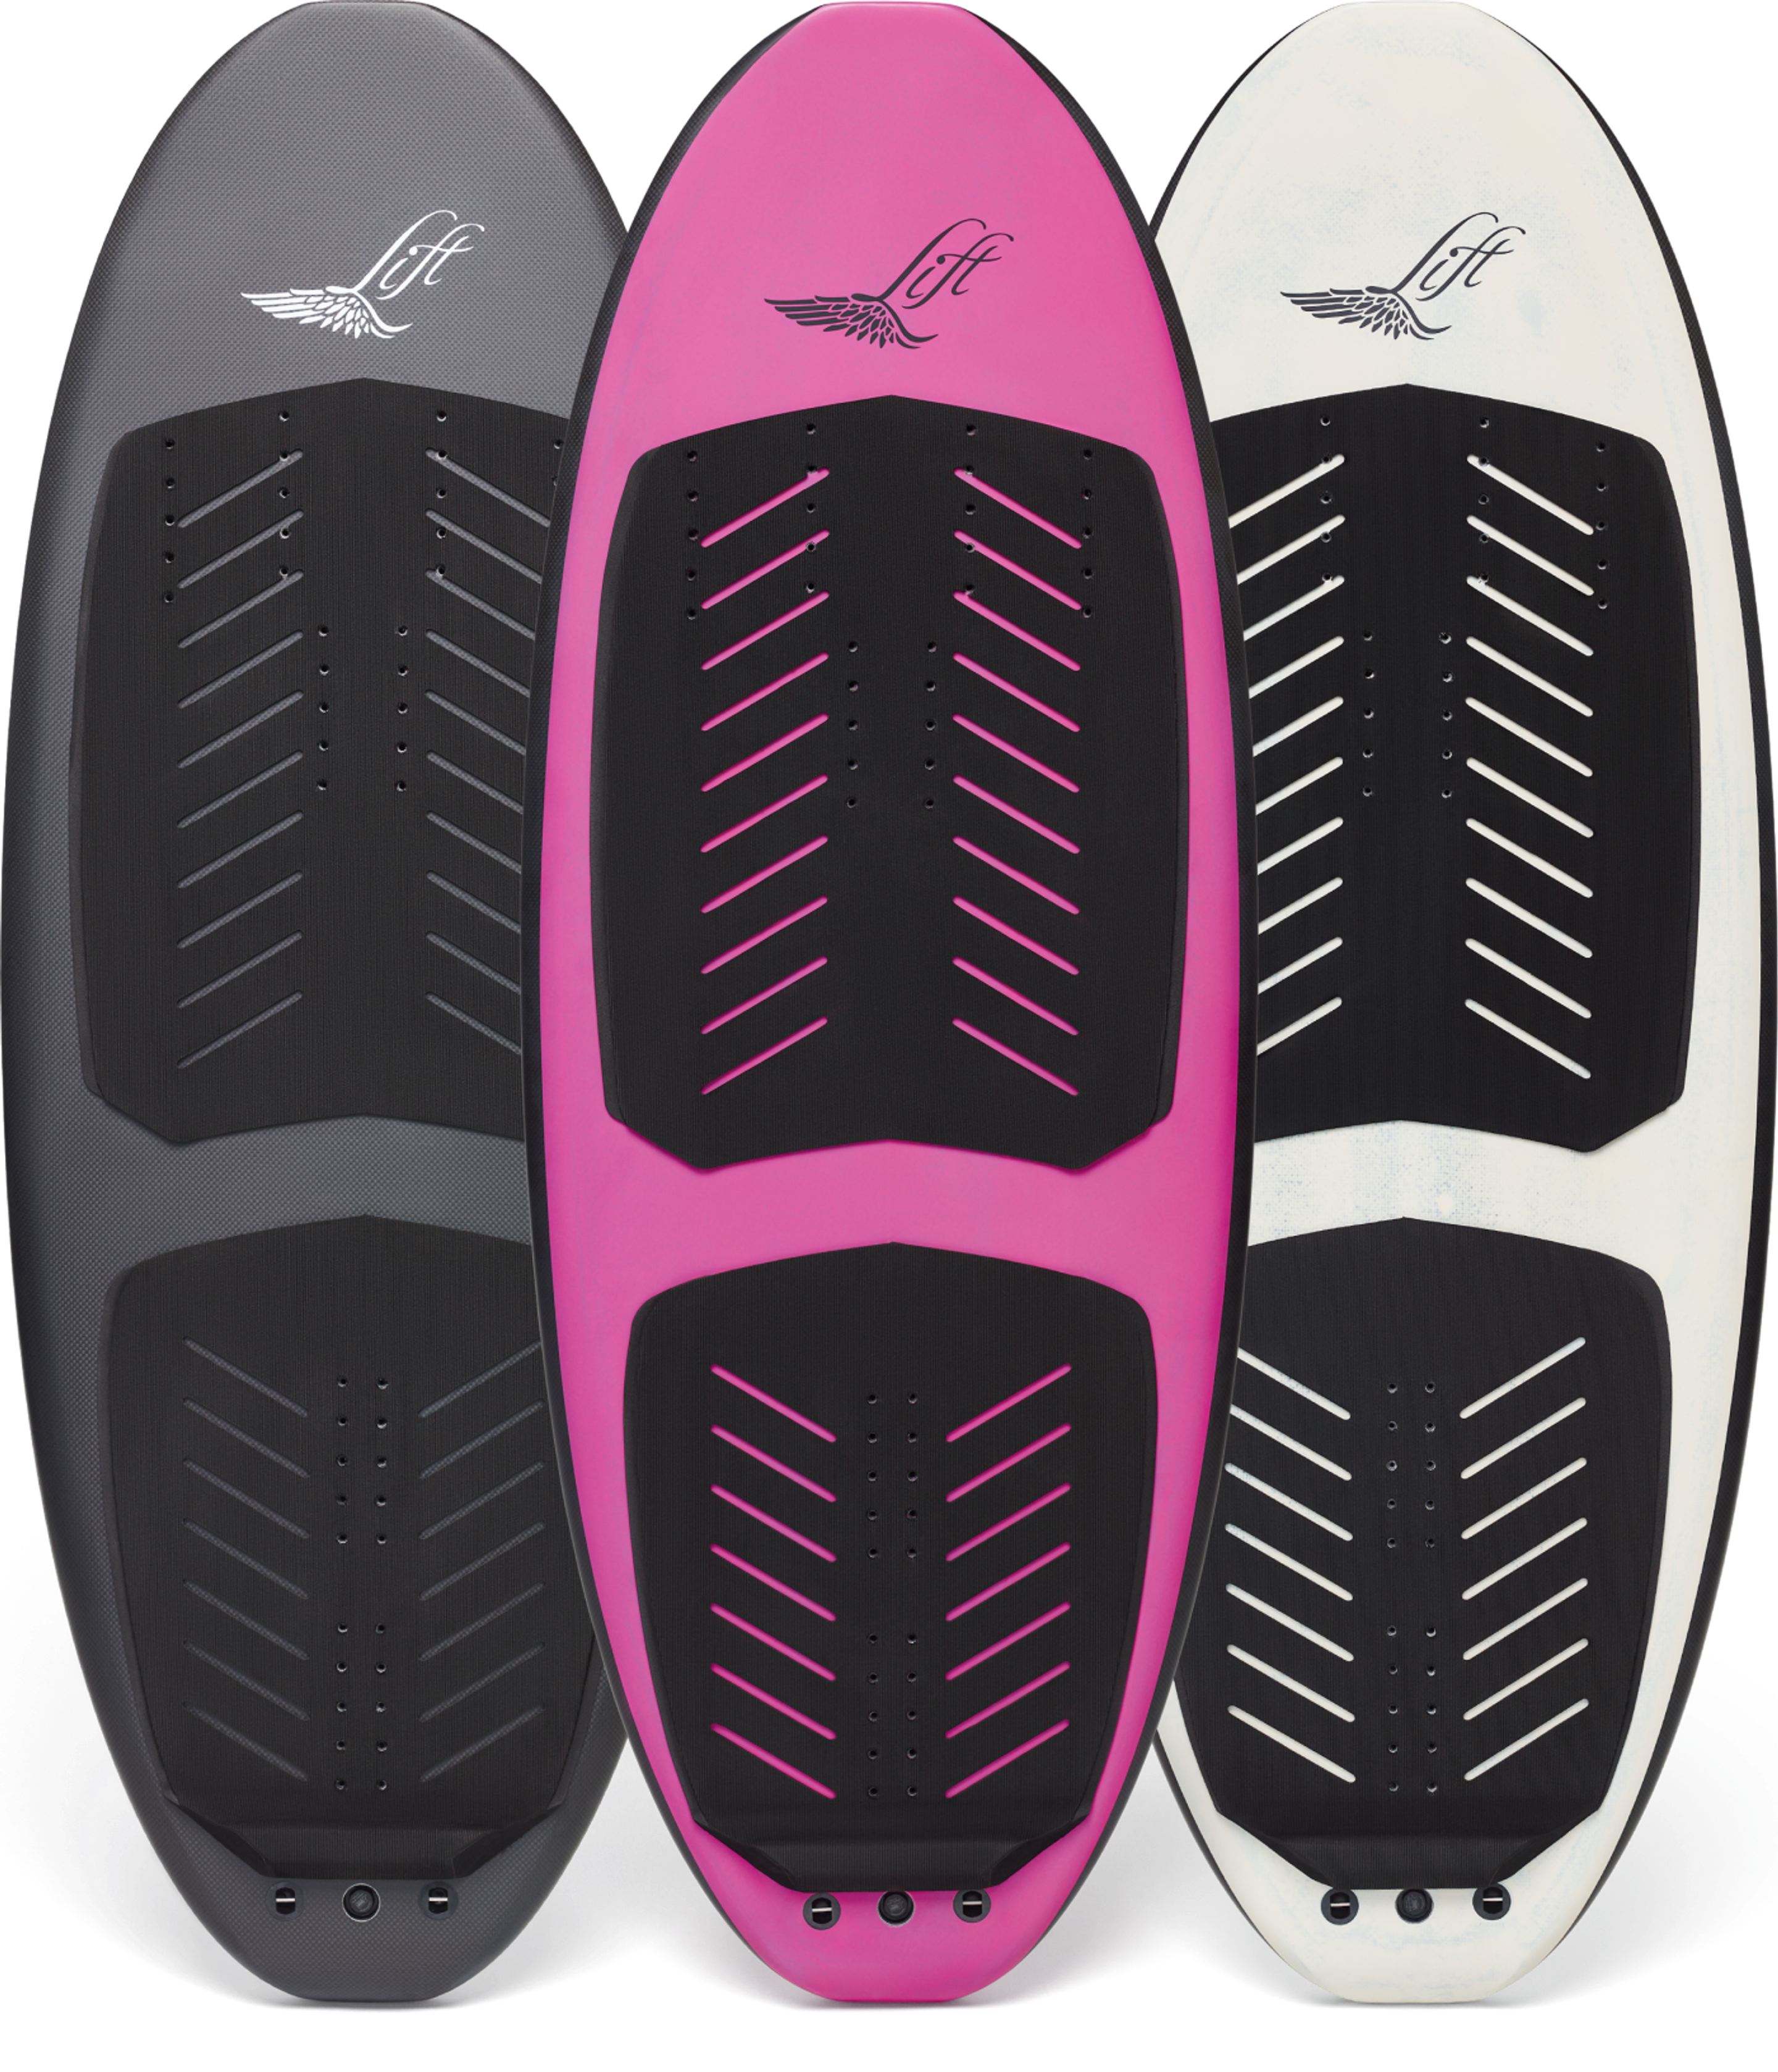 semi-custome line up in Jet Black, Bubblegum (pink), and Off-white